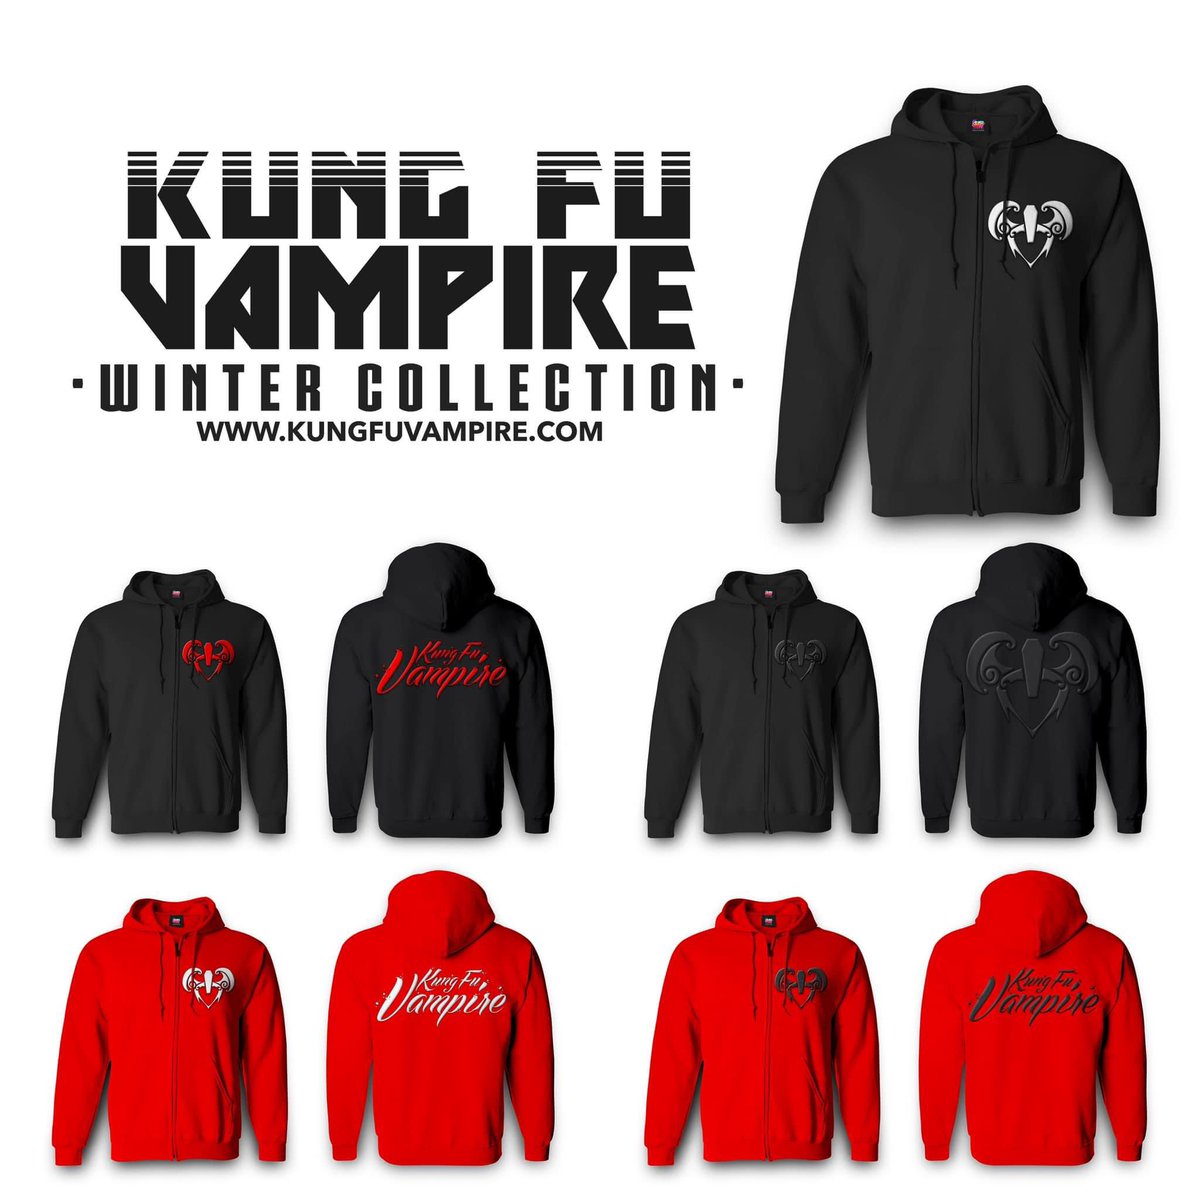 Mi carnal @kungfuvampire just dropped his new winter collection! Go cop one now!!!! #KungFuVampire #KFV #MerchDrop #WinterCollection